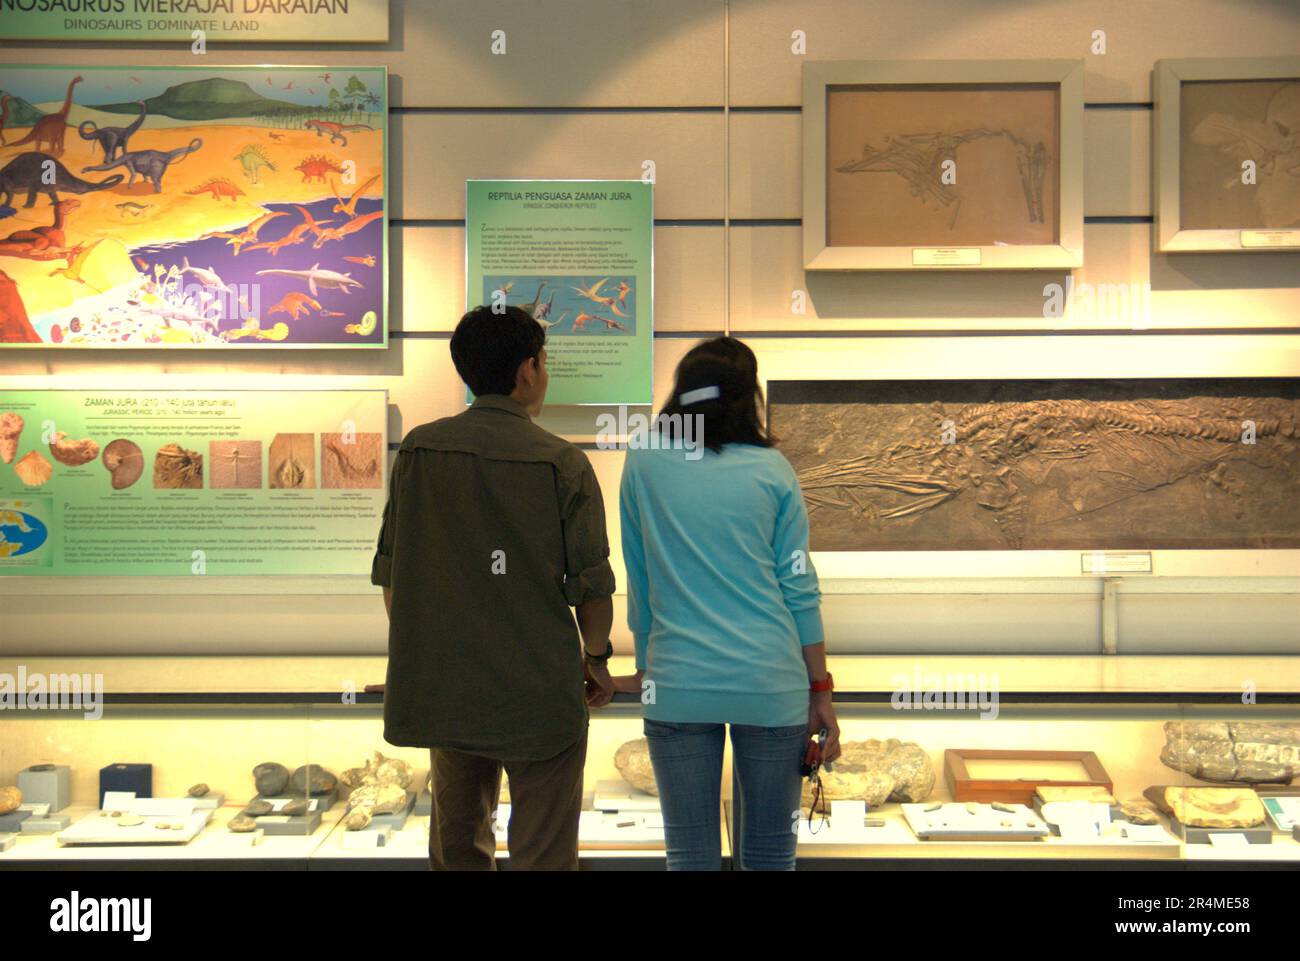 A pair of museum visitors are paying attention to information panels at Museum Geologi (Geology Museum) in Bandung, West Java, Indonesia. Stock Photo